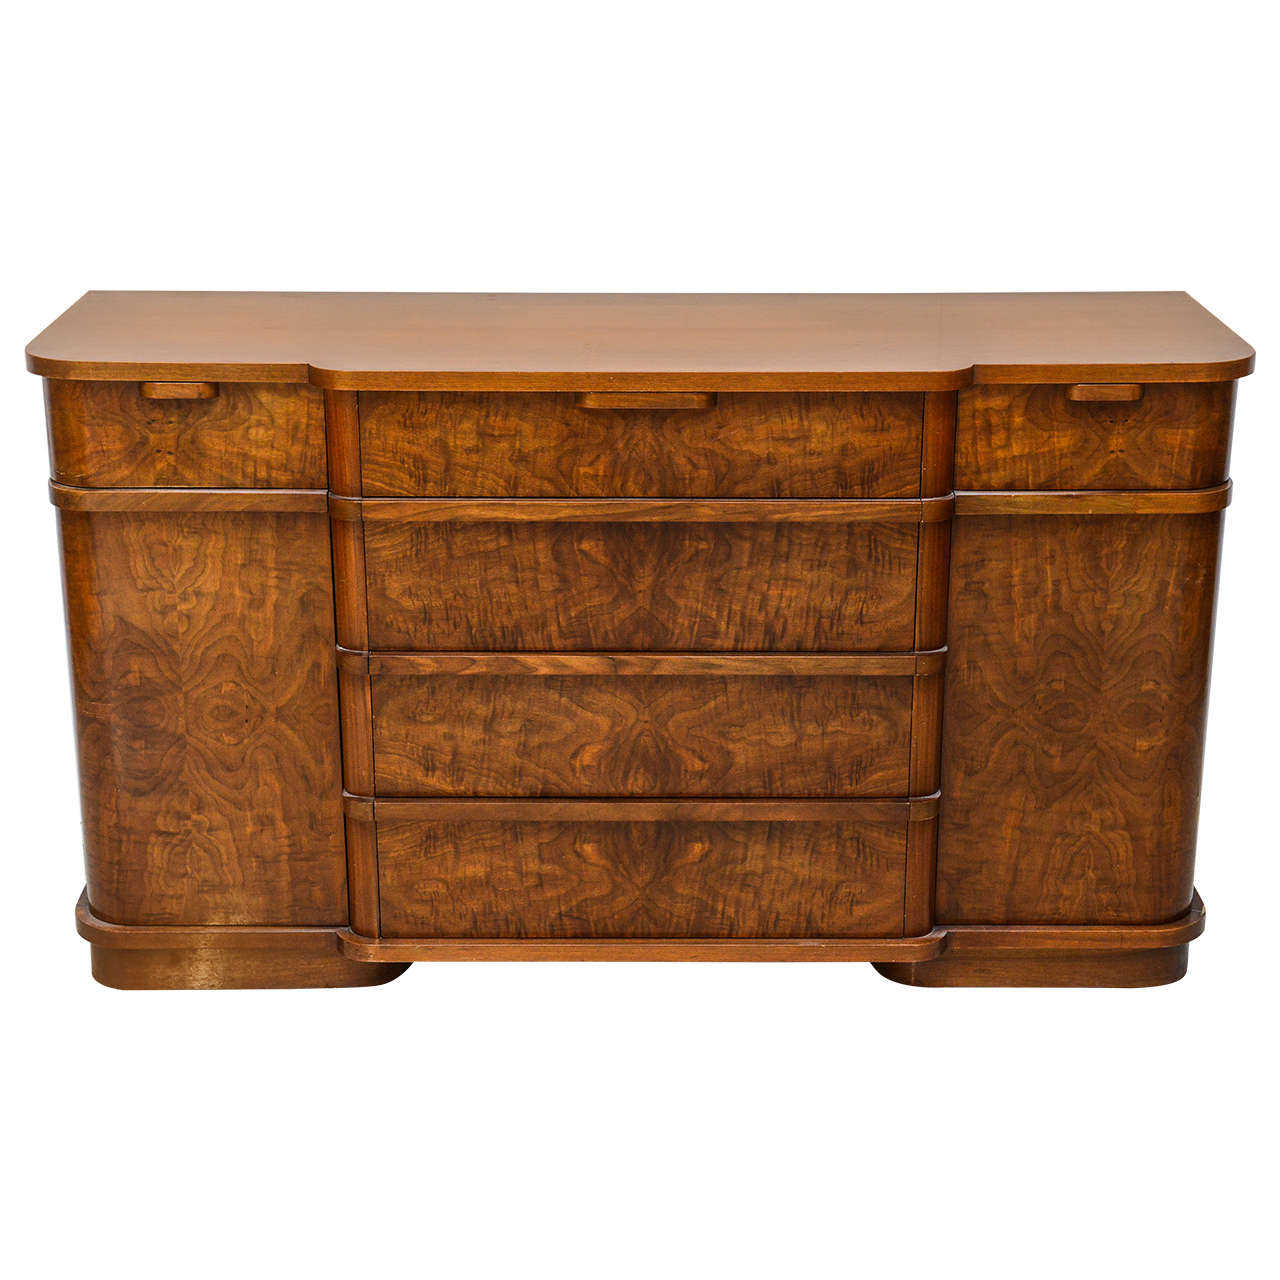 Late Art Deco Flame Mahogany Sideboard or Buffet, France